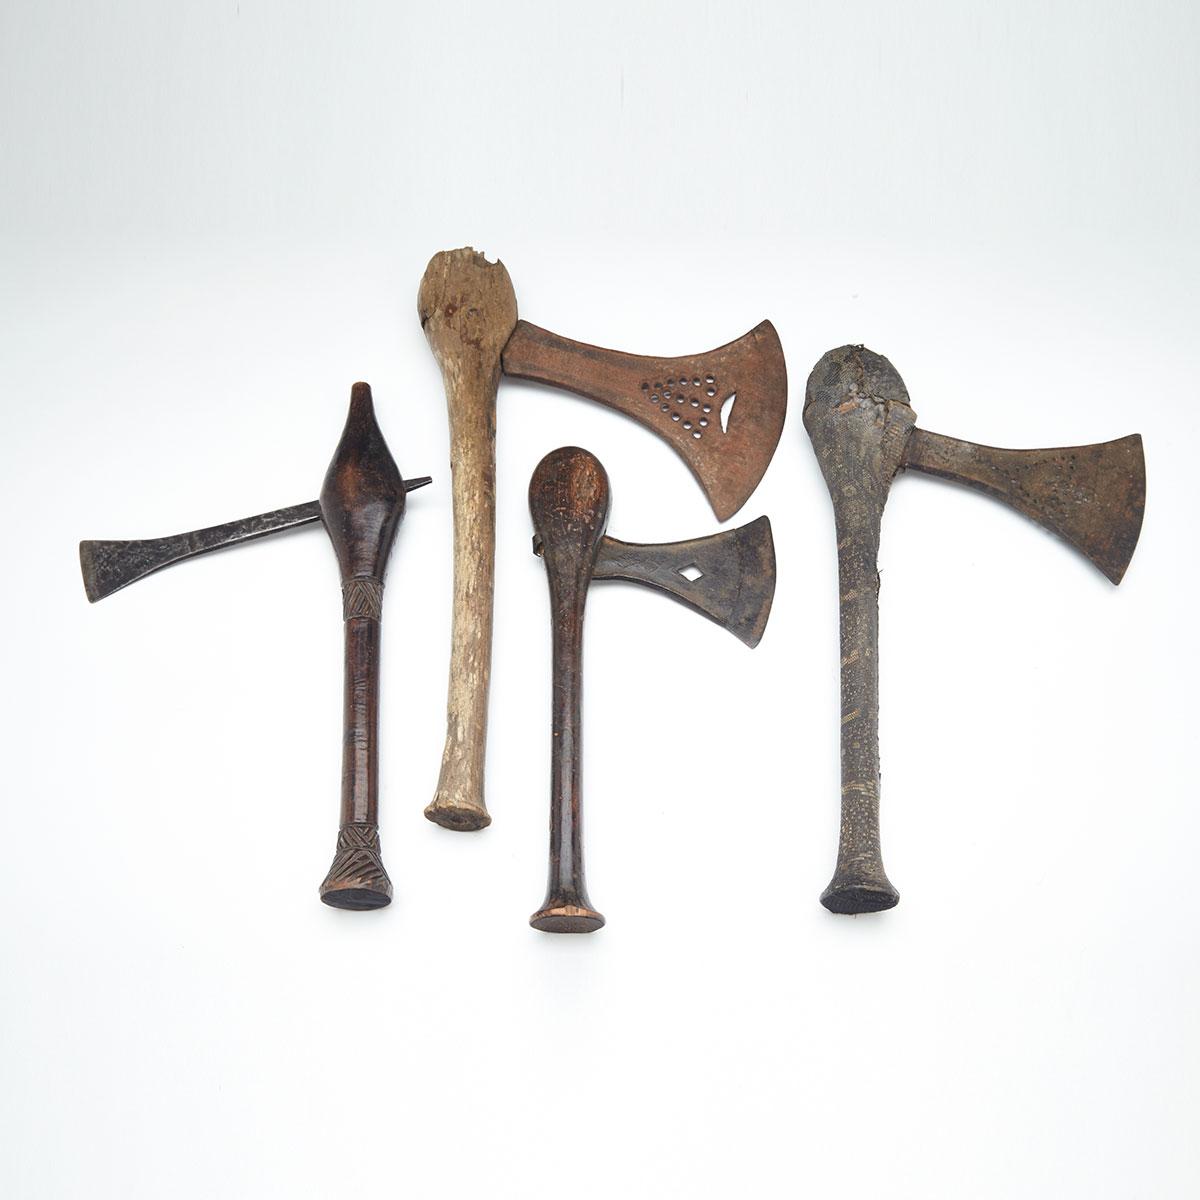 Four African Axes, 19th century